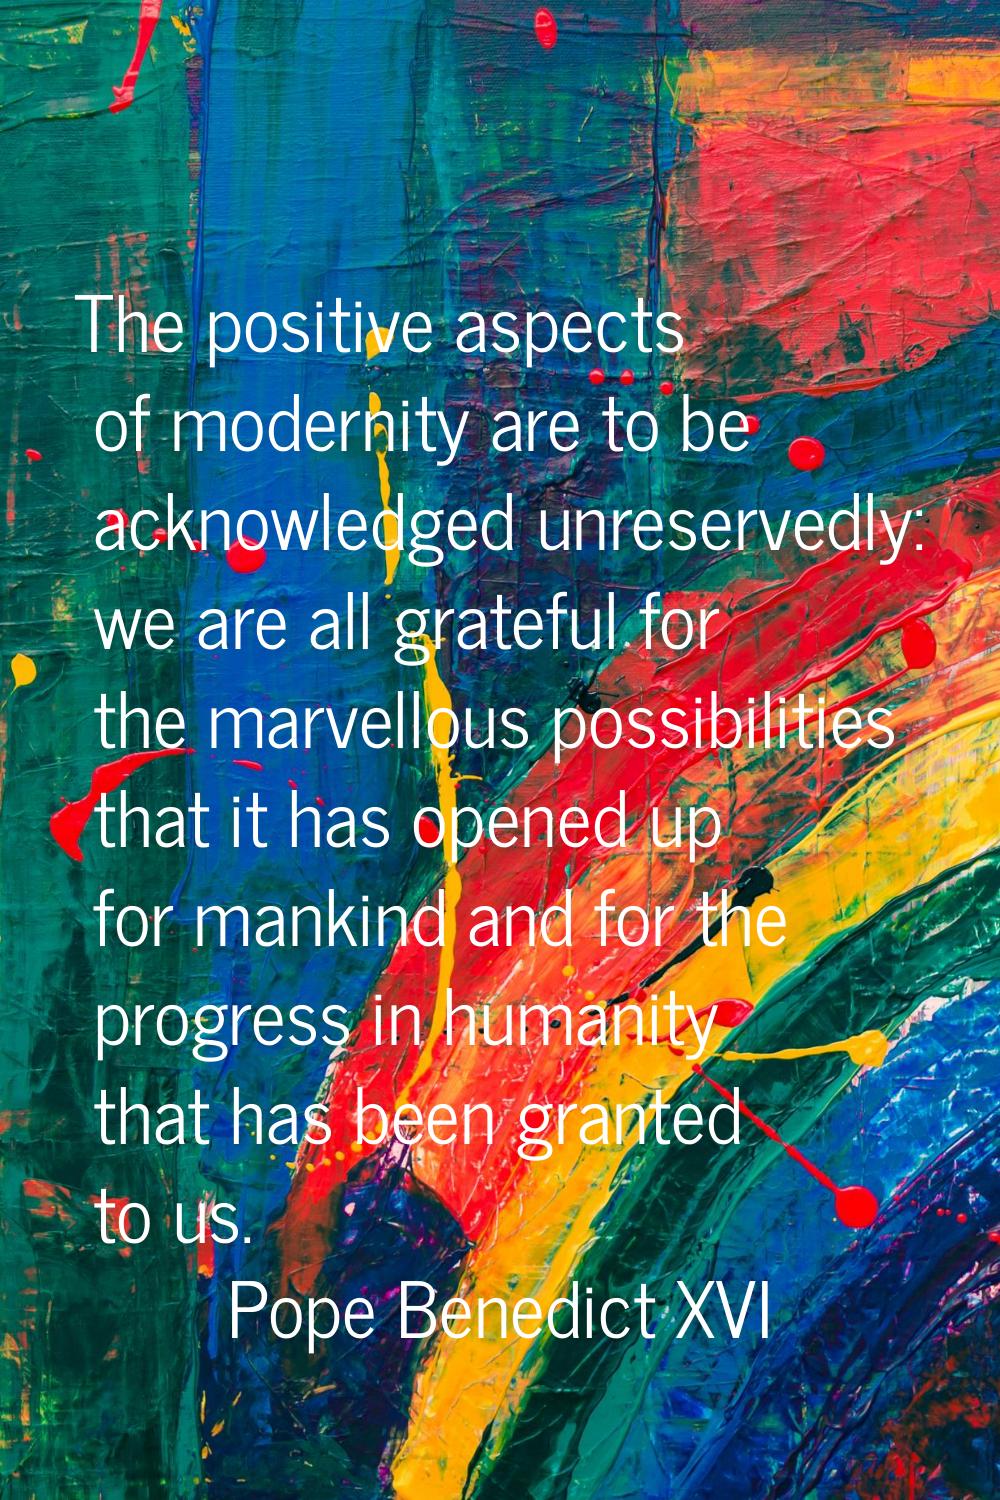 The positive aspects of modernity are to be acknowledged unreservedly: we are all grateful for the 